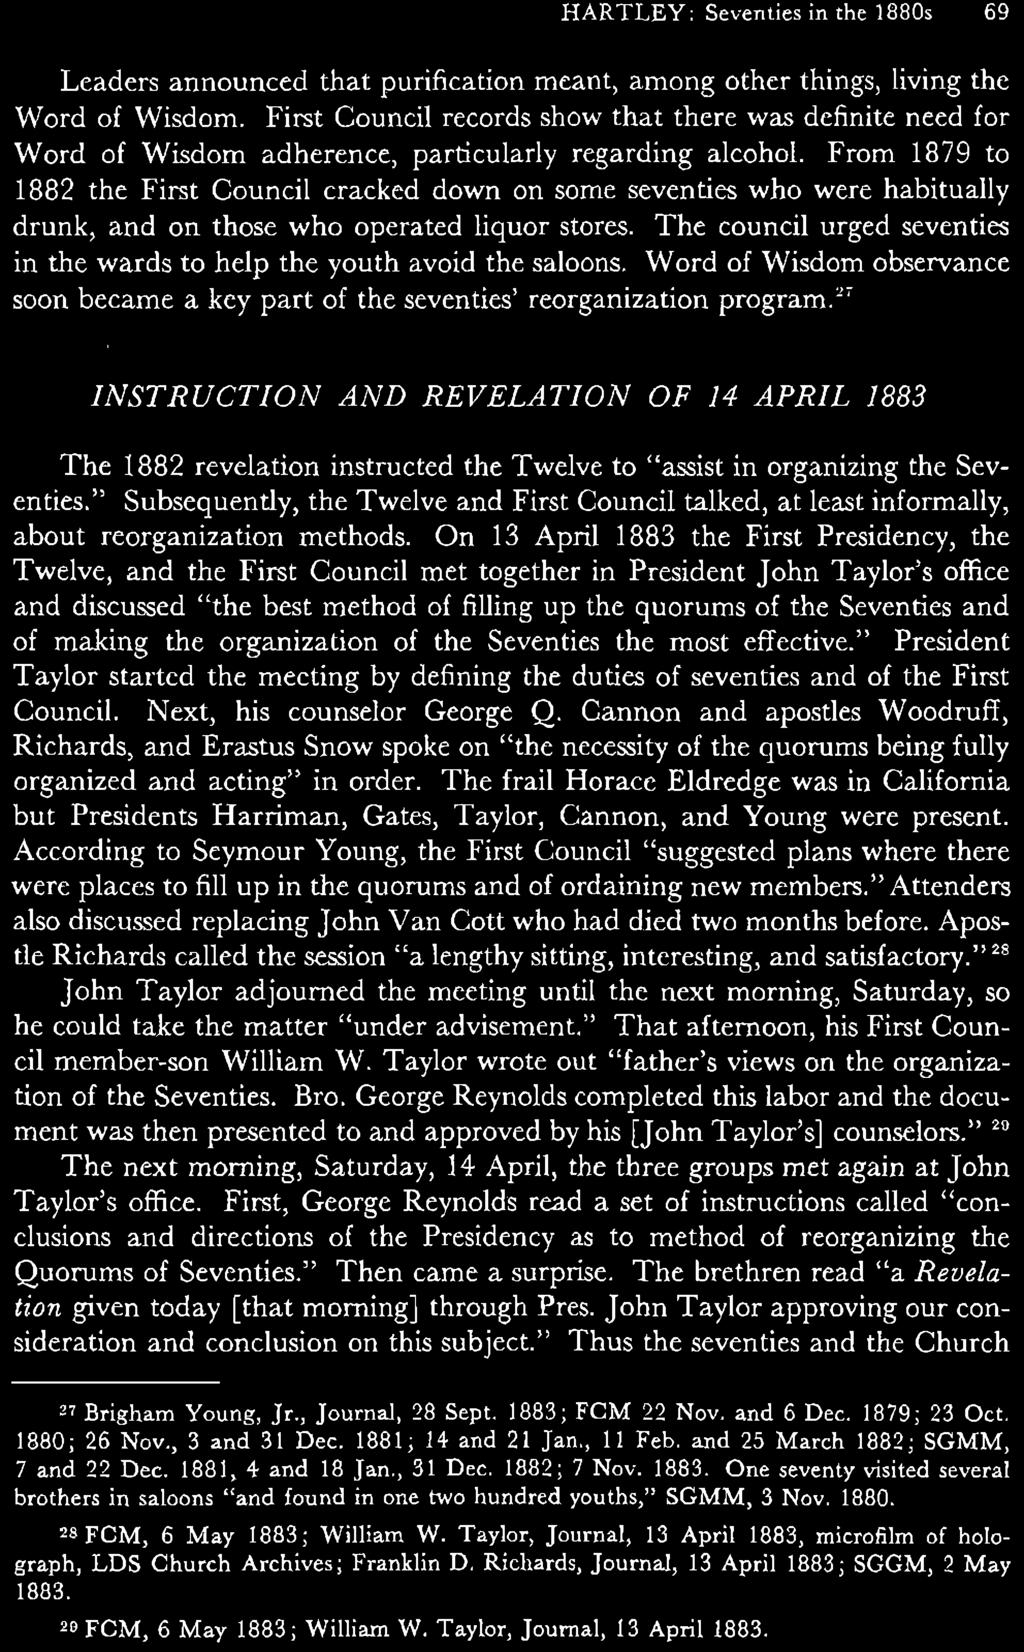 On 13 April 1883 the First Presidency, the Twelve, and the First Council met together in President John Taylor's office and discussed "the best method of filling up the quorums of the Seventies and